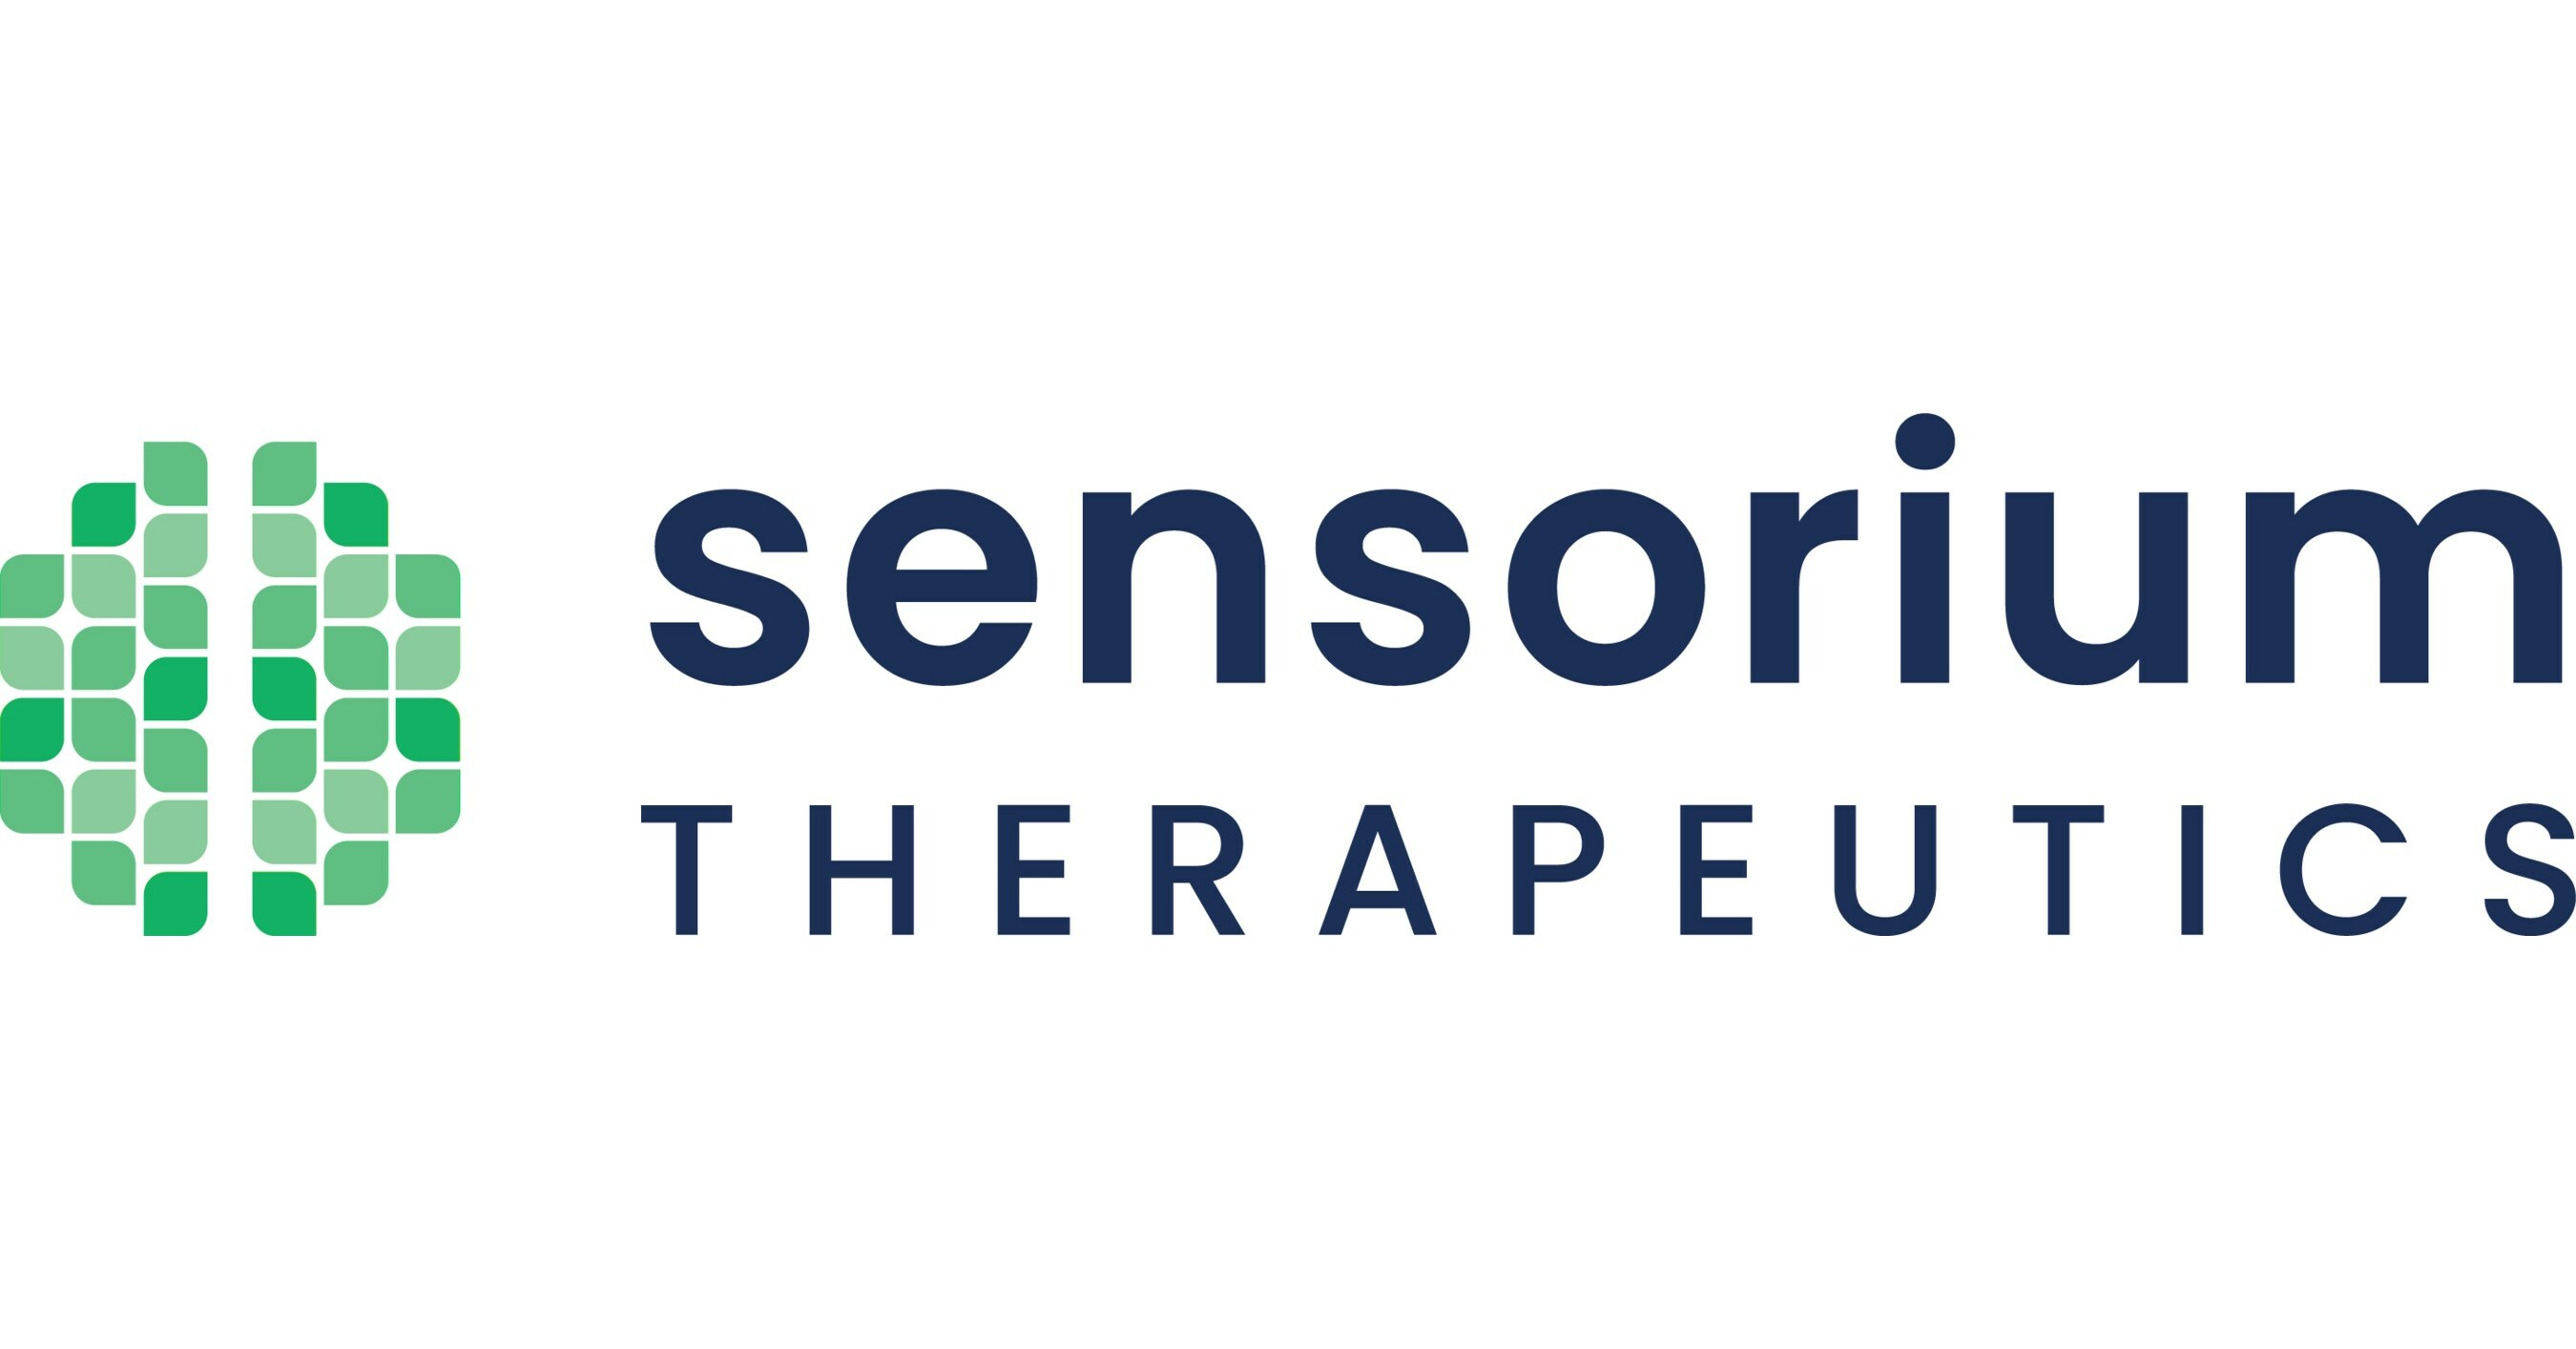 Sensorium Therapeutics Appoints Sam Rasty as Chief Business Officer